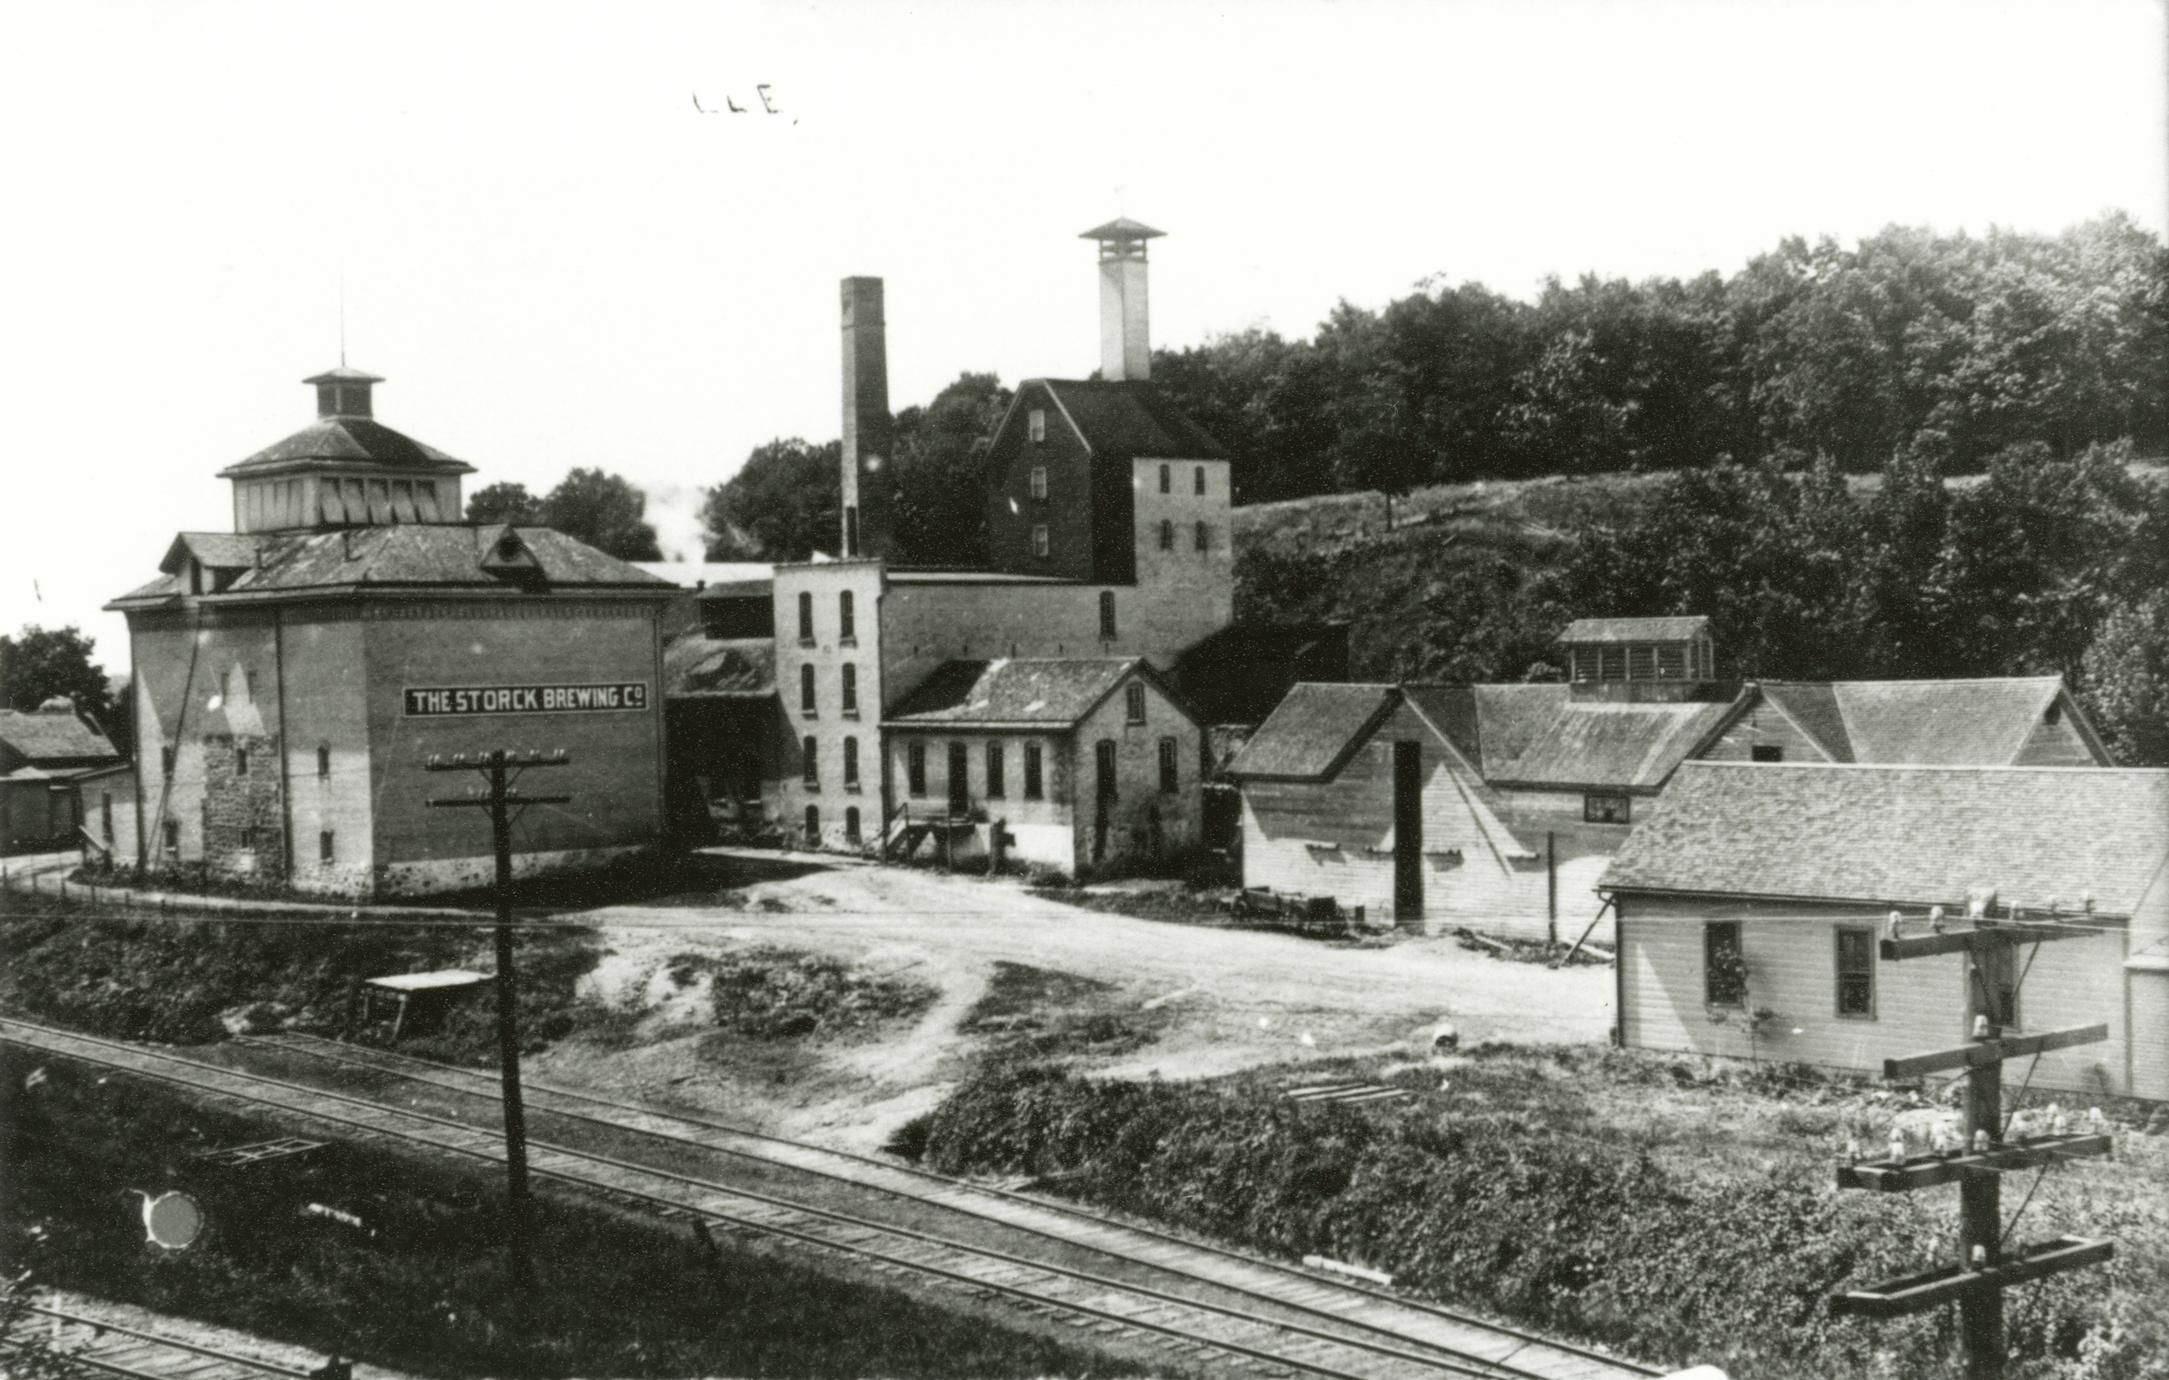 View of Storck Brewery